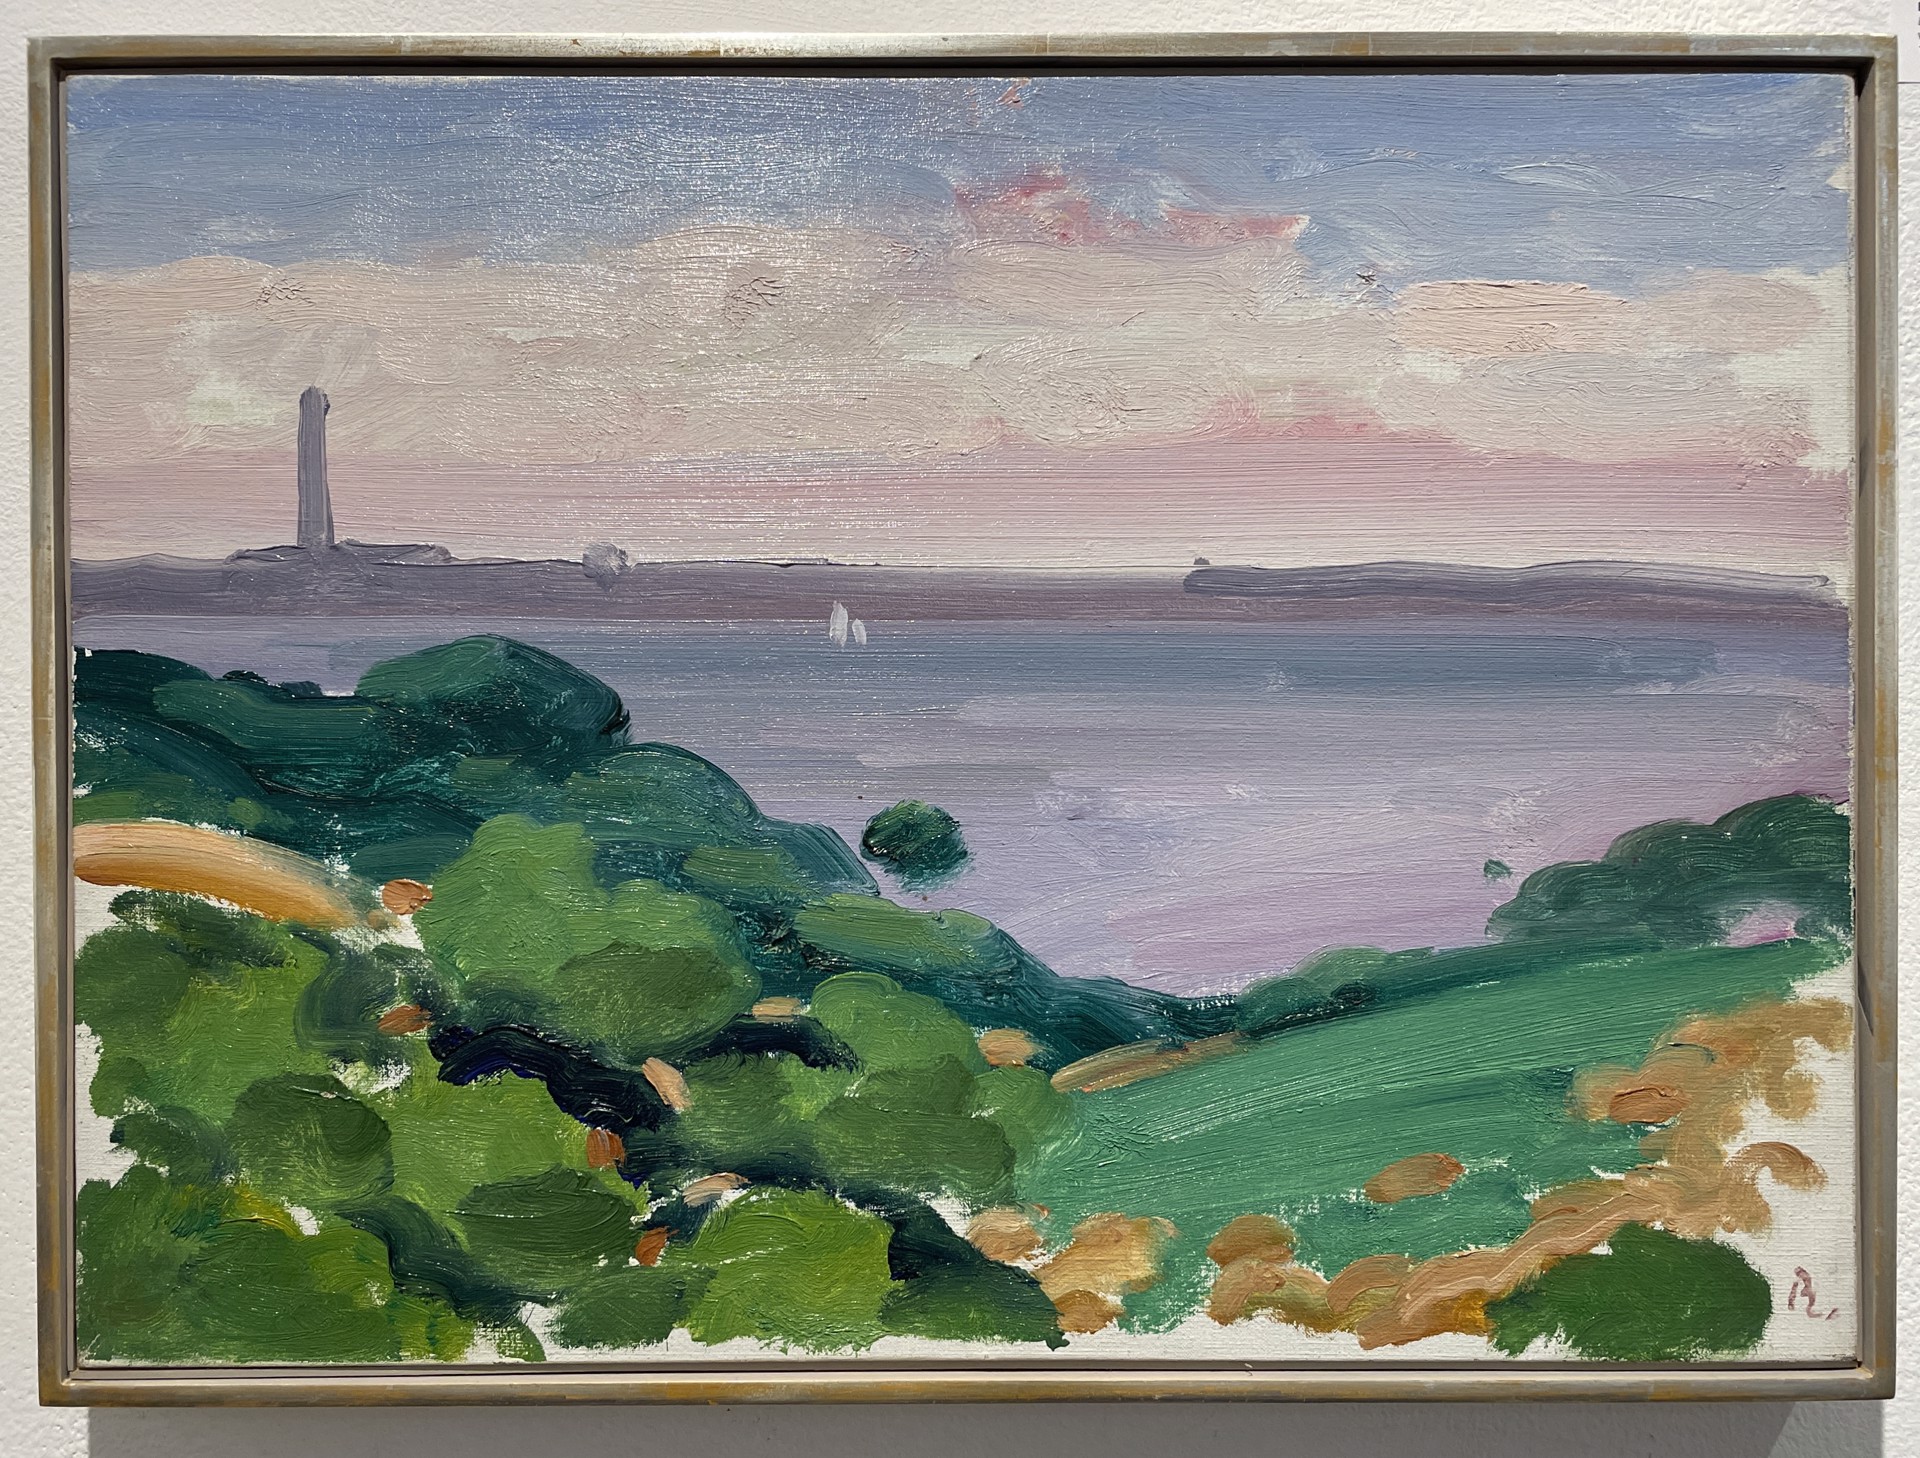 Provincetown Monument from Bound Brook Island by Paul Resika